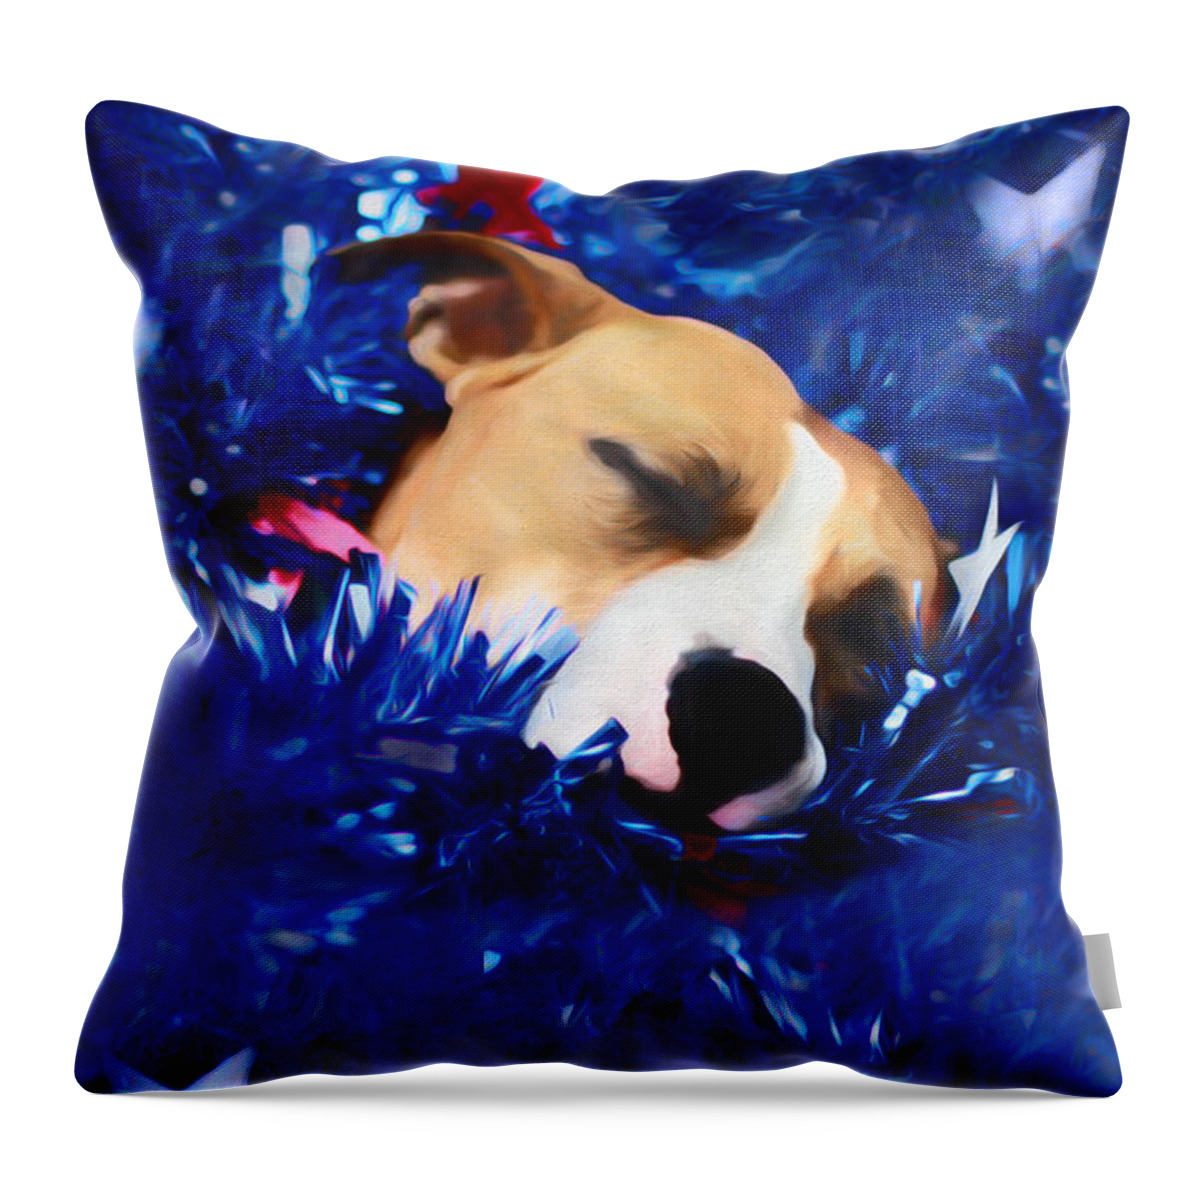 Usa Throw Pillow featuring the photograph Cradled by a Blanket of Stars and Stripes by Shelley Neff